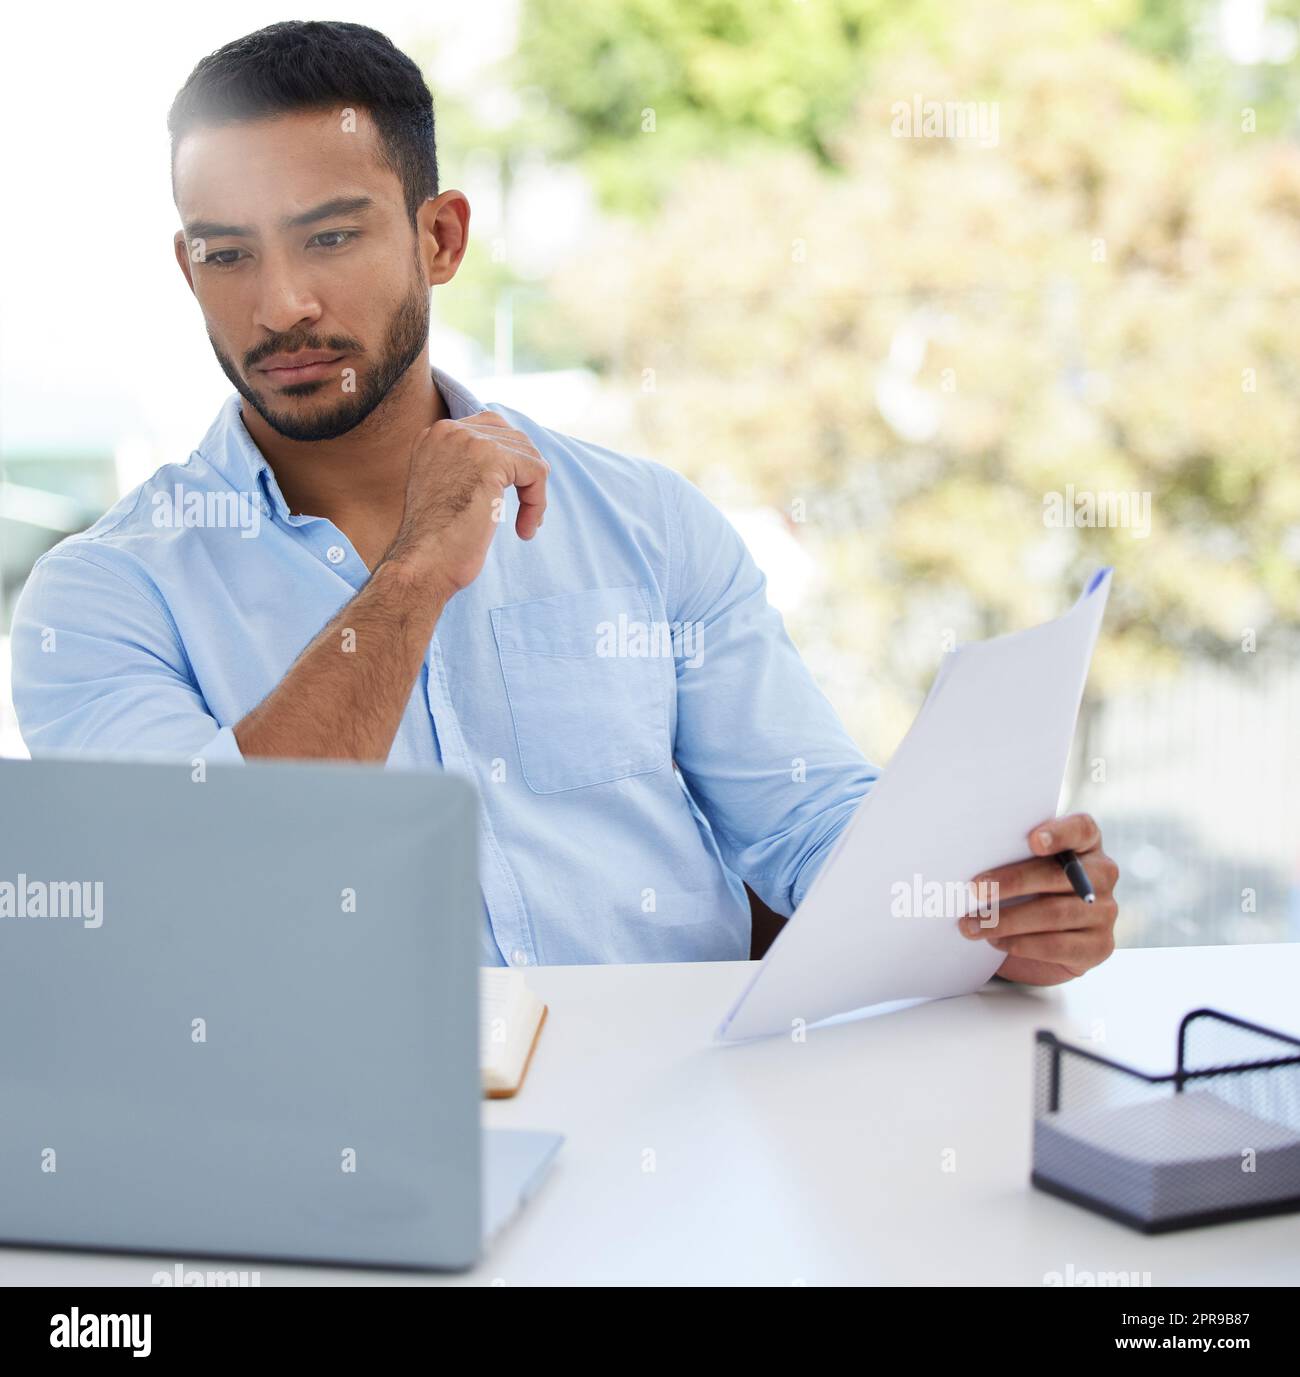 He never overlooks the details. a young businessman going through paperwork while working on a laptop in an office. Stock Photo